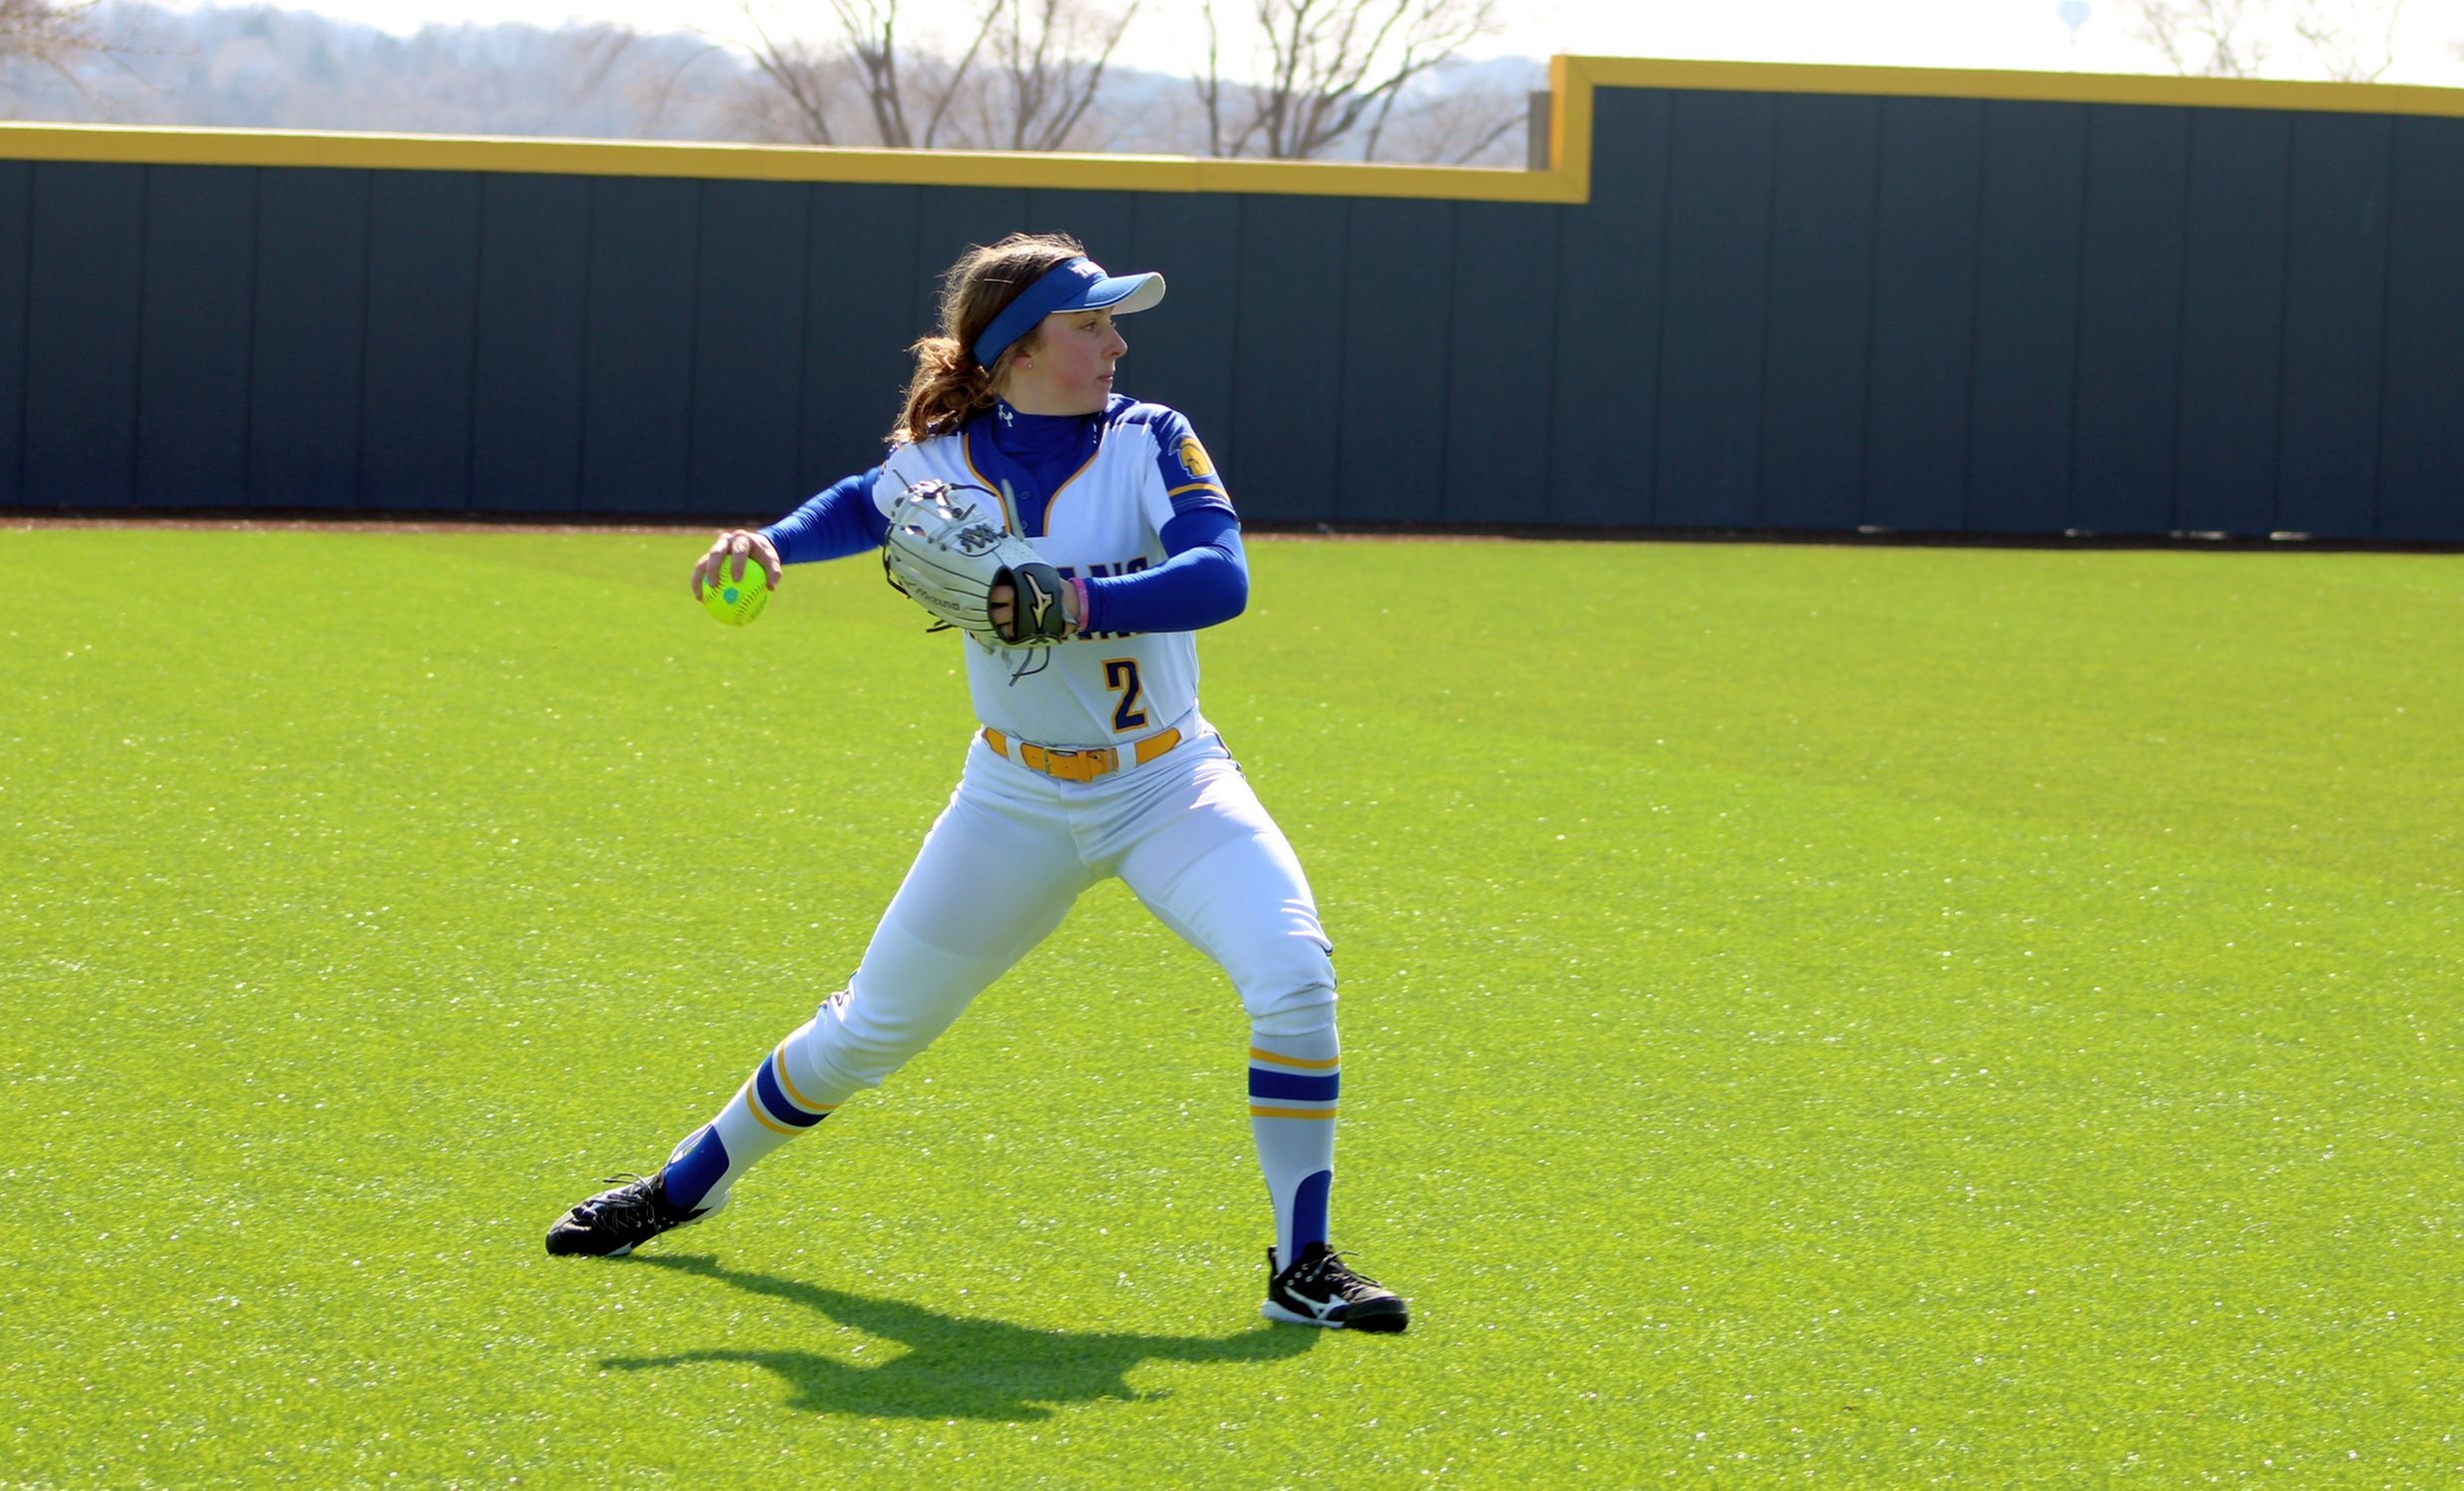 NIACC shortstop Katy Olive throws the ball back into the infield during a recent contest at Iowa Western.